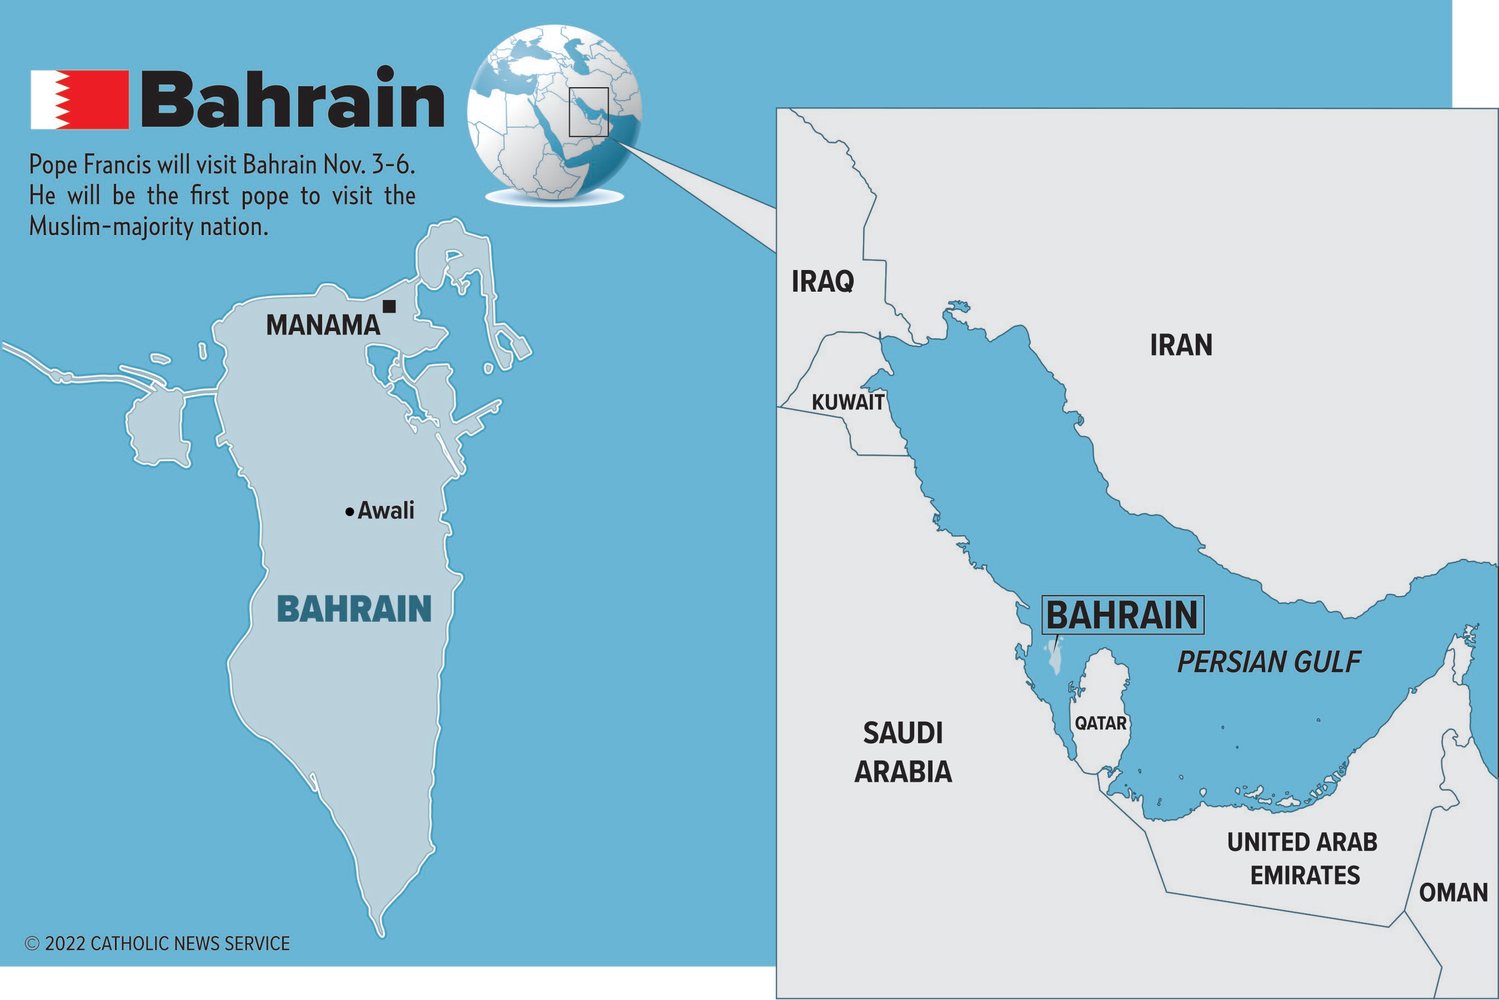 Pope Francis is the first pope to visit Bahrain Nov. 3-6.